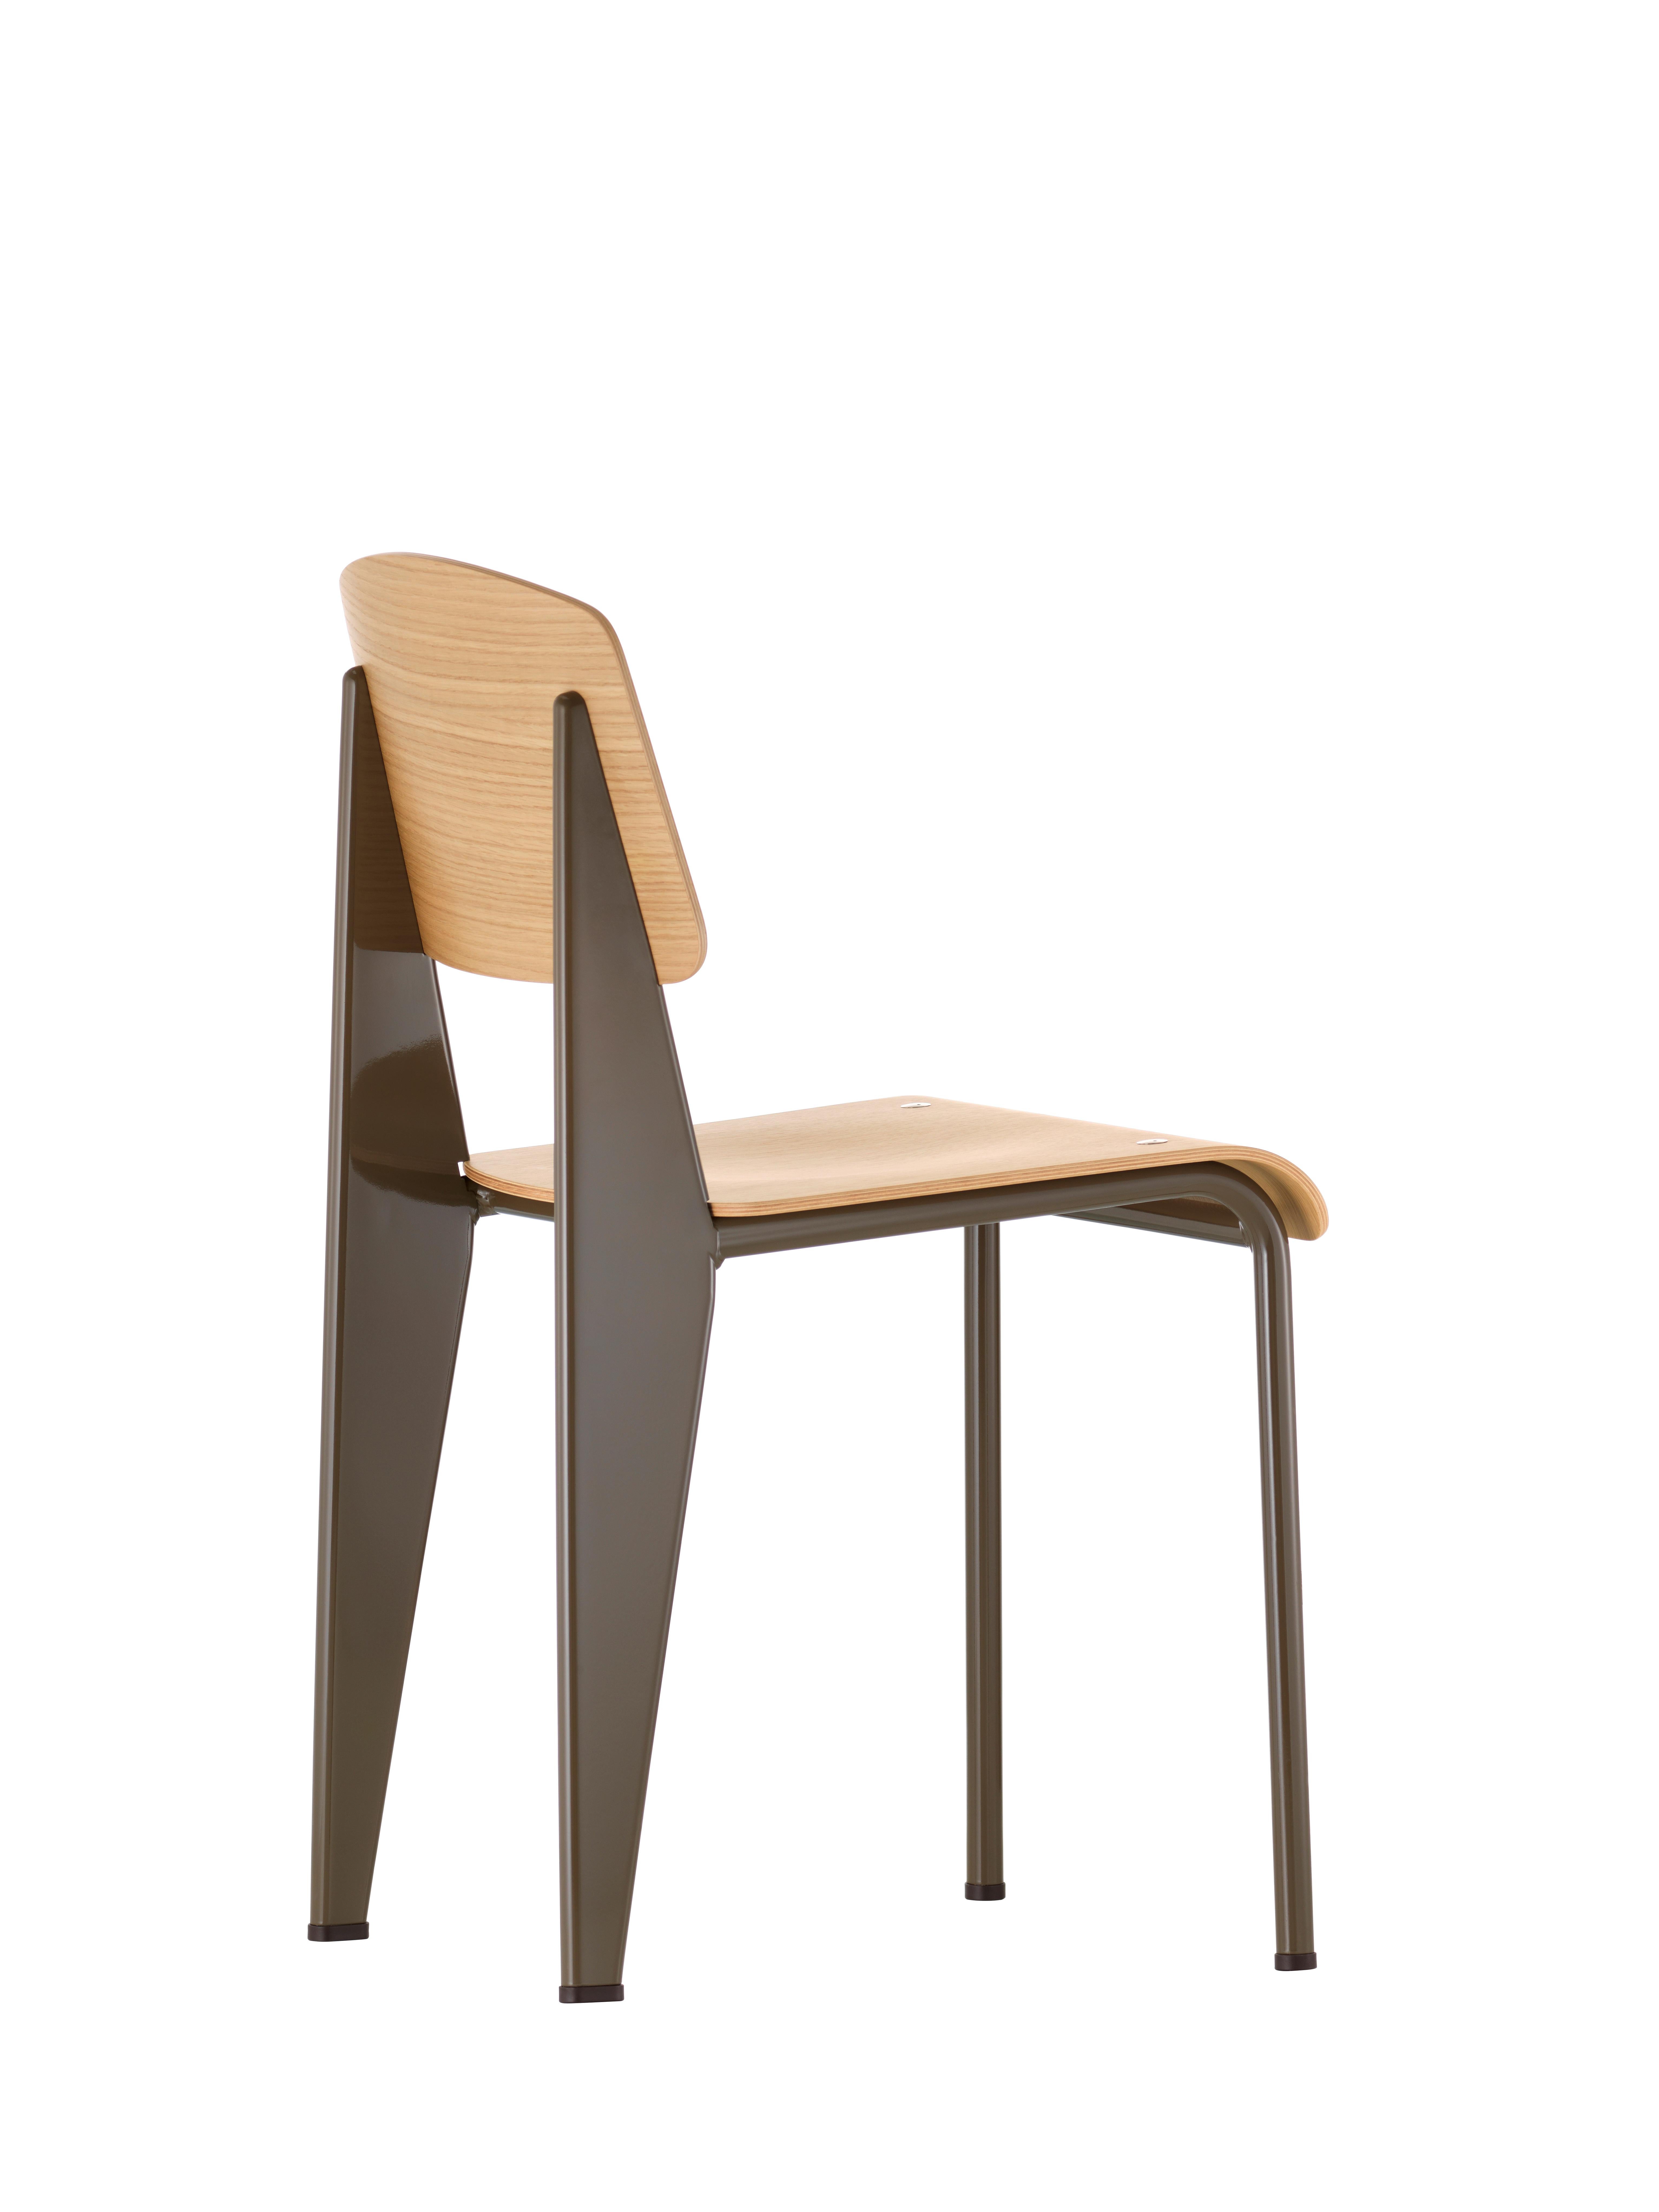 Jean Prouvé Standard chair in natural oak and black metal for Vitra. The Standard chair is an early masterpiece by the French designer and engineer Jean Prouvé. Originally designed in 1934, the Standard evolved into one of the most famous classics